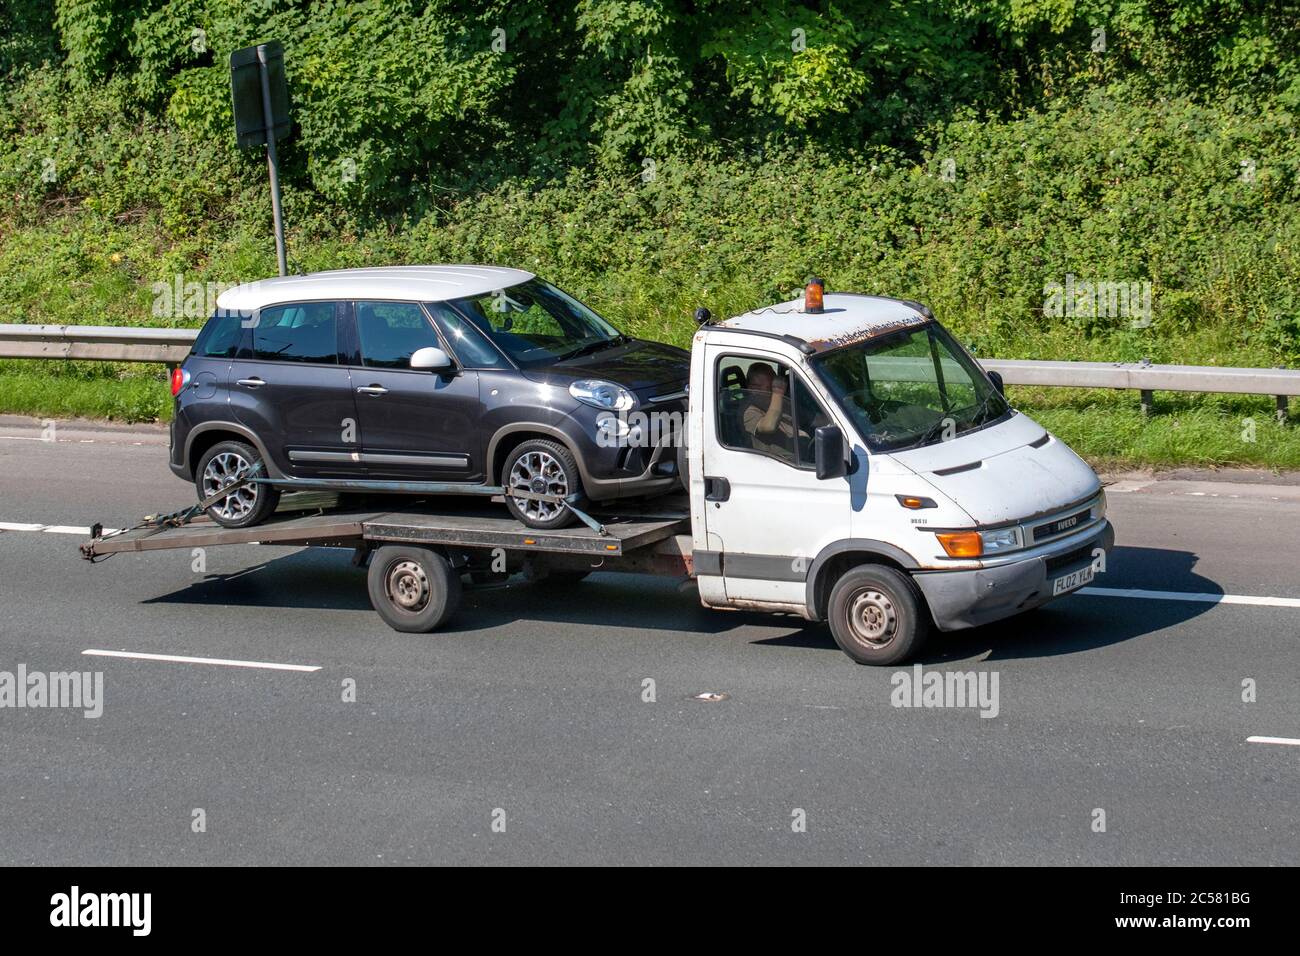 Old 2002 Iveco flat bed car carrier; Vehicular traffic moving vehicles, cars driving vehicle on UK roads, carrying Fiat 500 plus motors, motoring on the M6 motorway highway network. Stock Photo